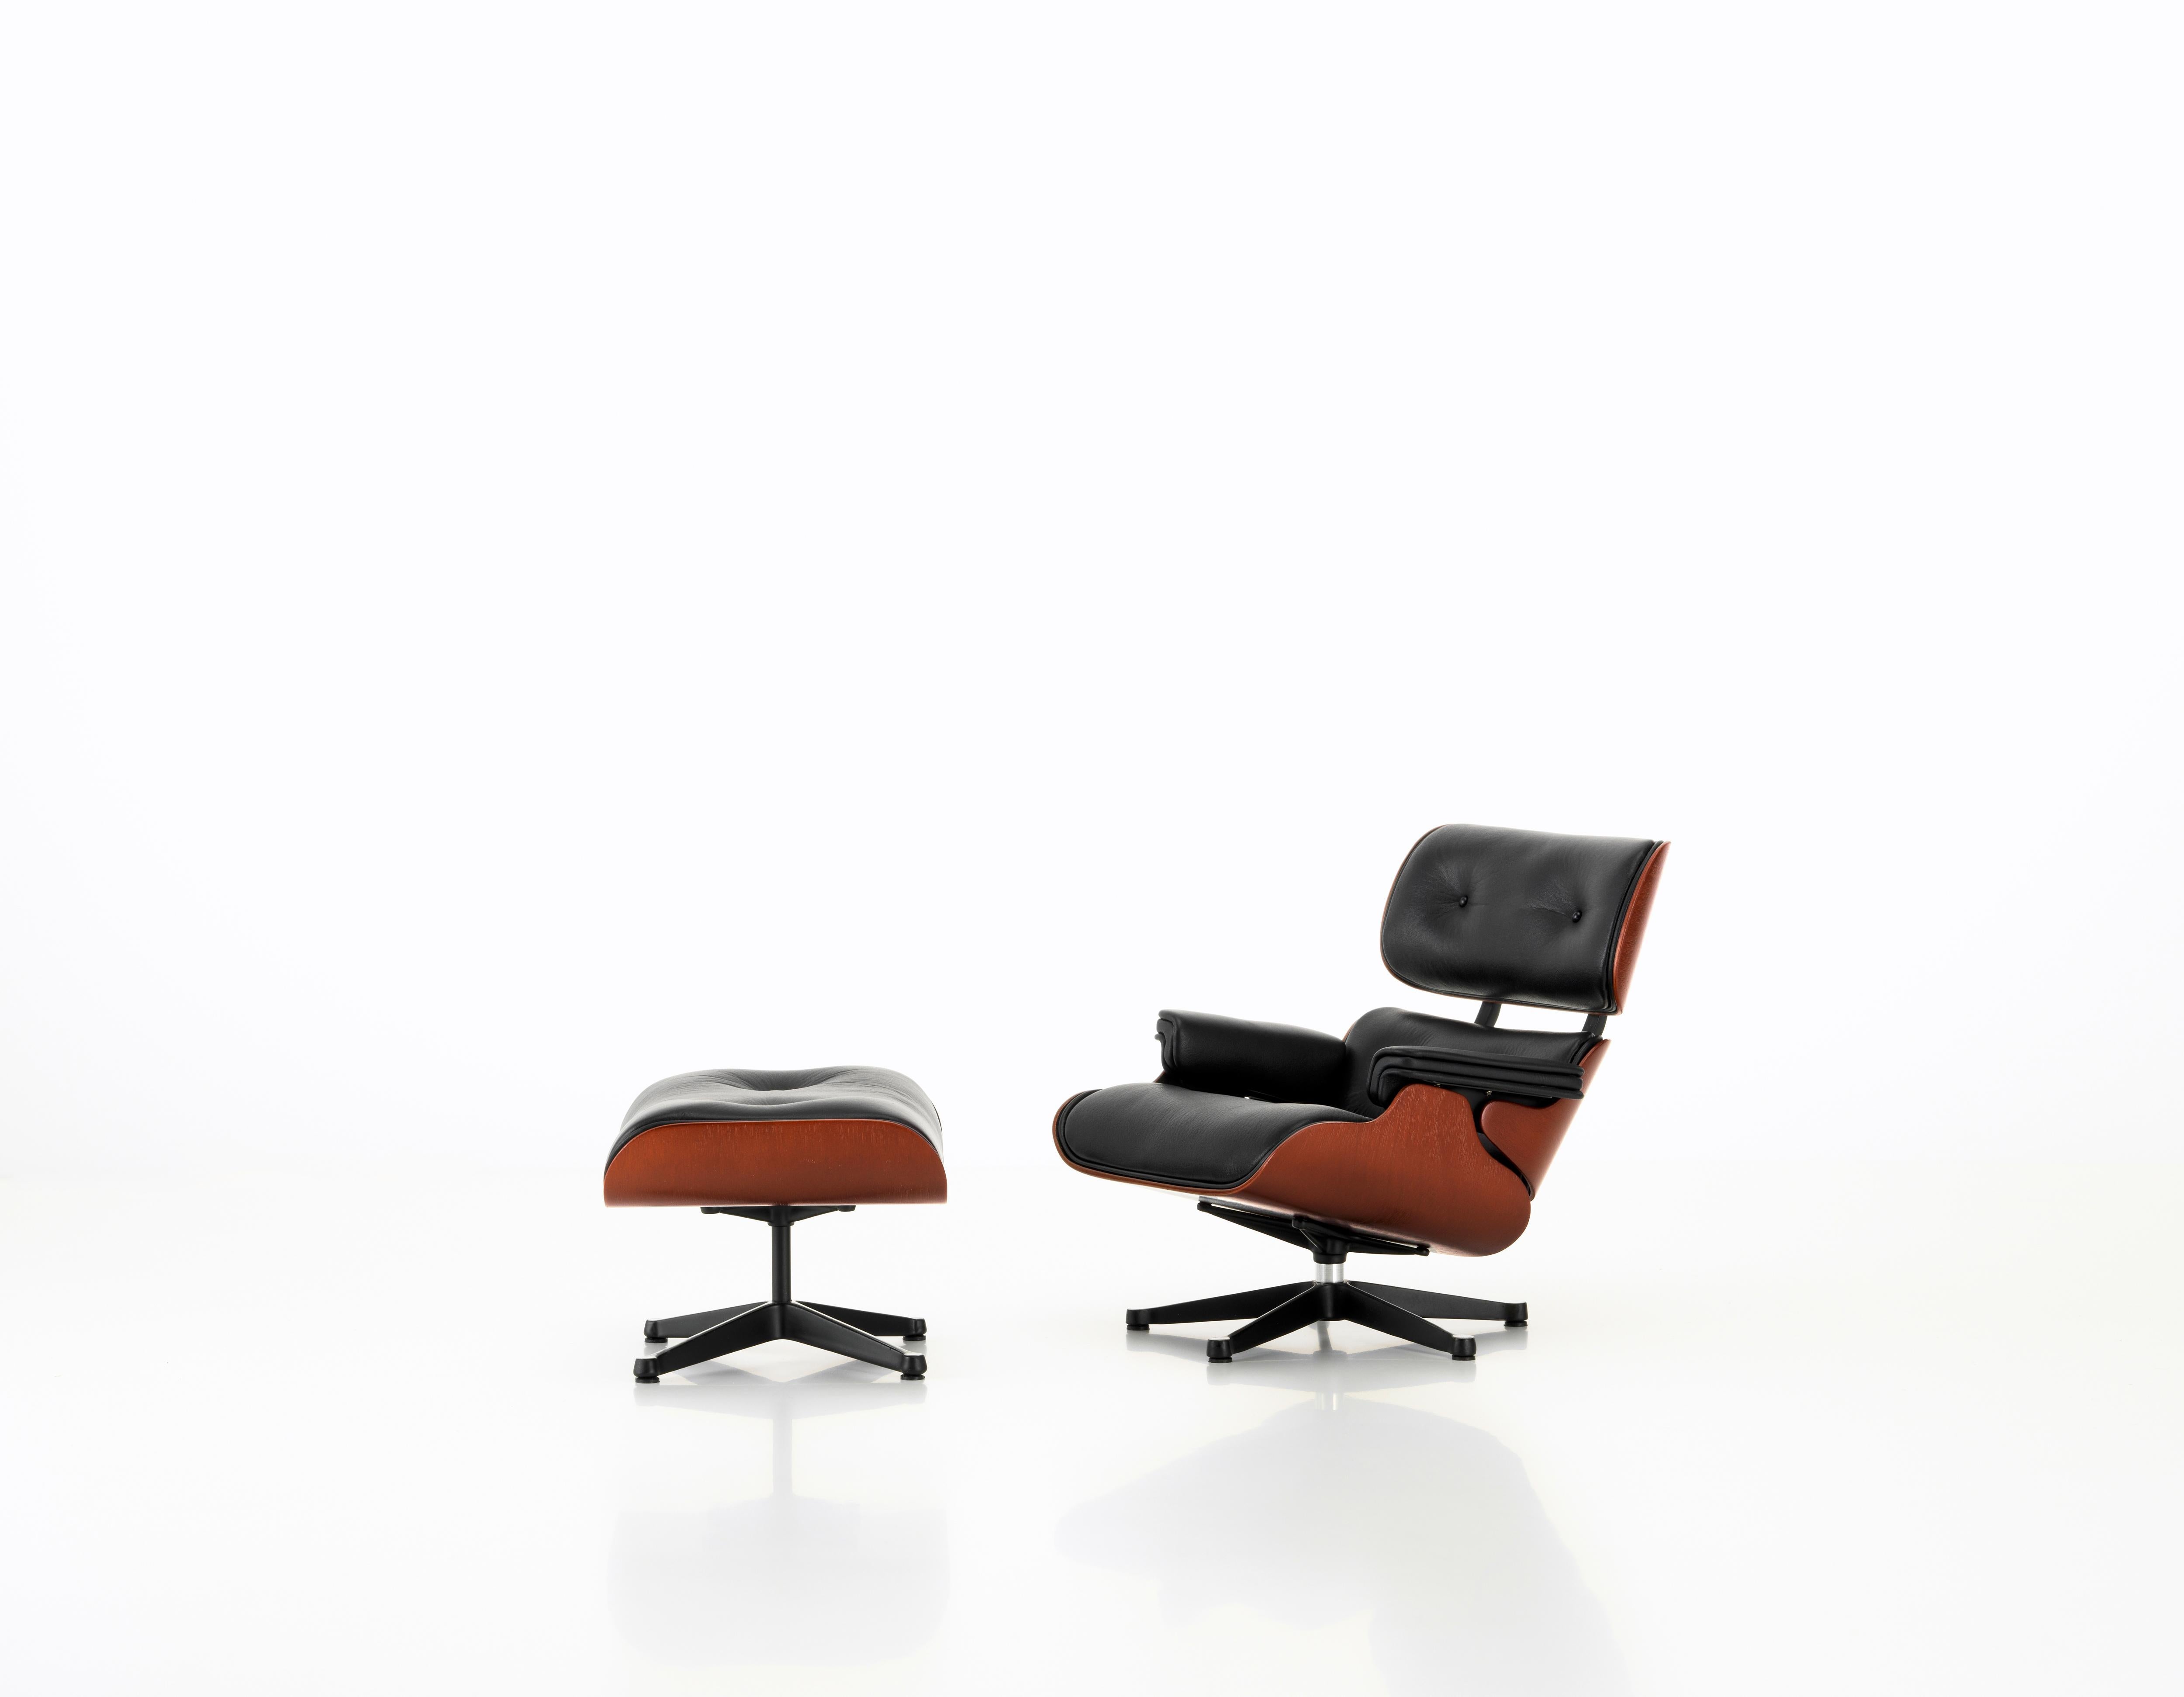 These items are currently only available in the United States.

The lounge chair is one of the best known creations of Charles and Ray Eames. Created in 1956, it has become a classic in modern furniture history. The miniature version in is a